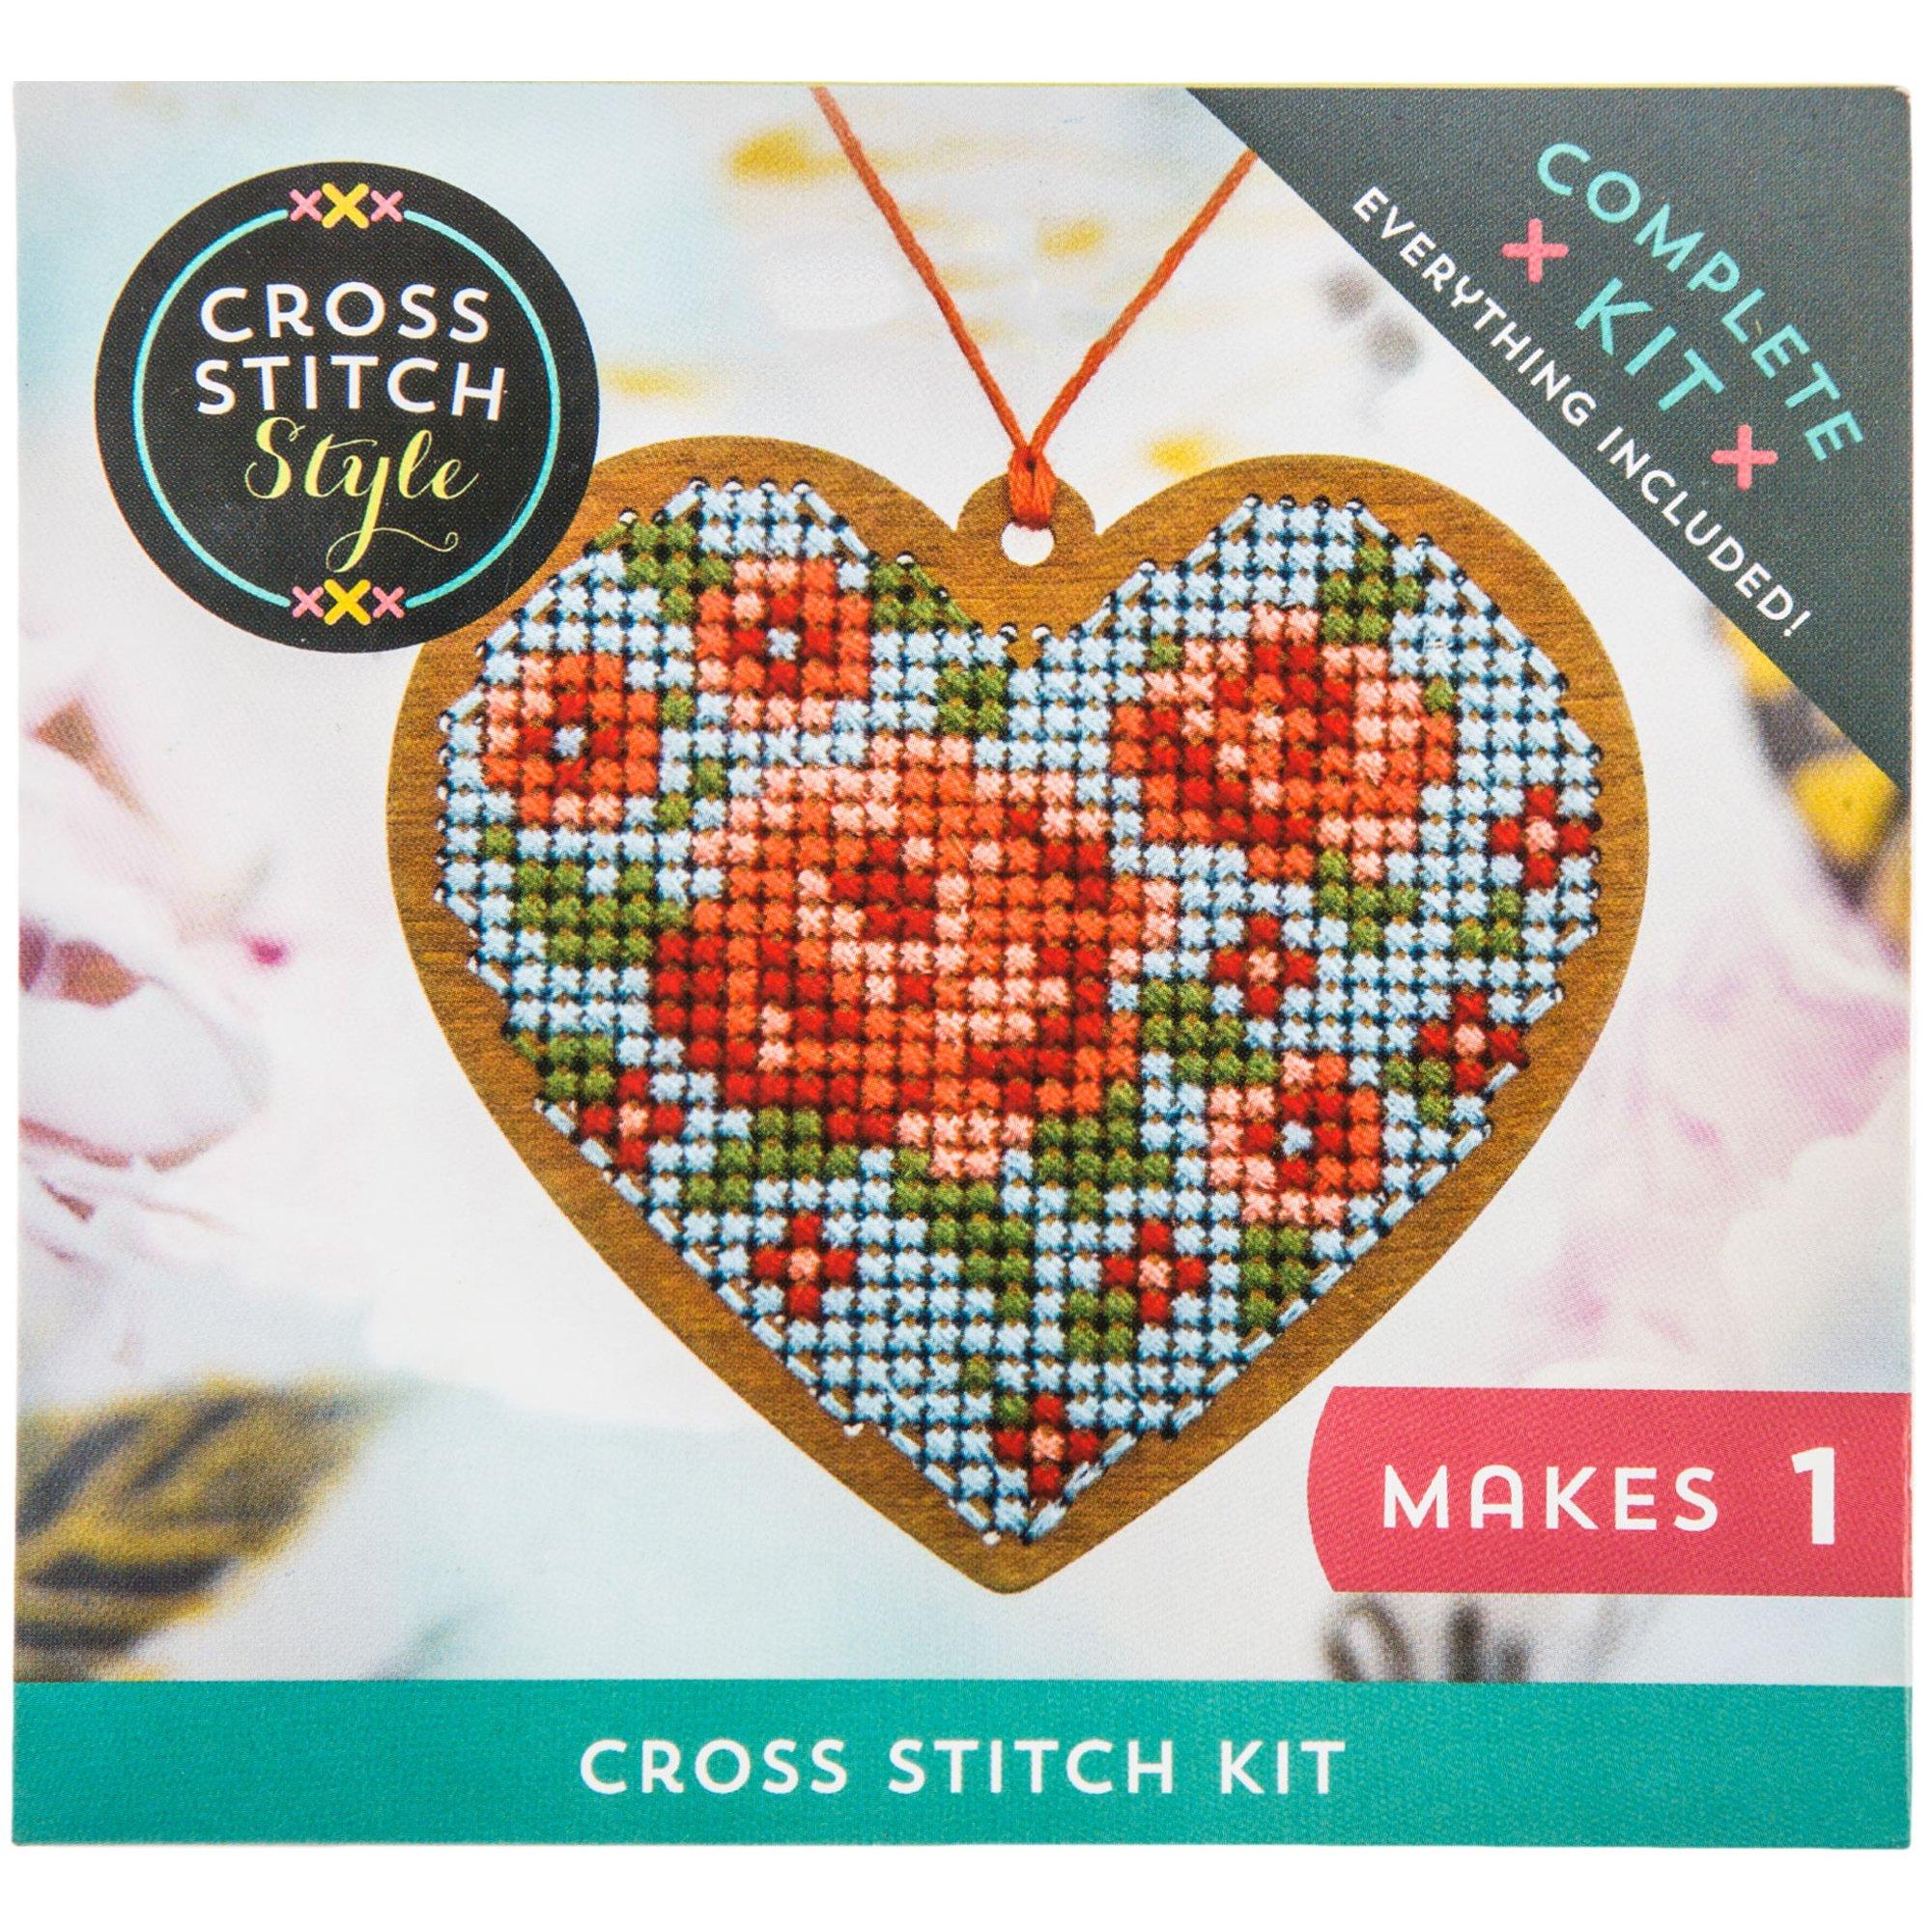 Heart Hands Stamped Embroidery Kit, Hobby Lobby